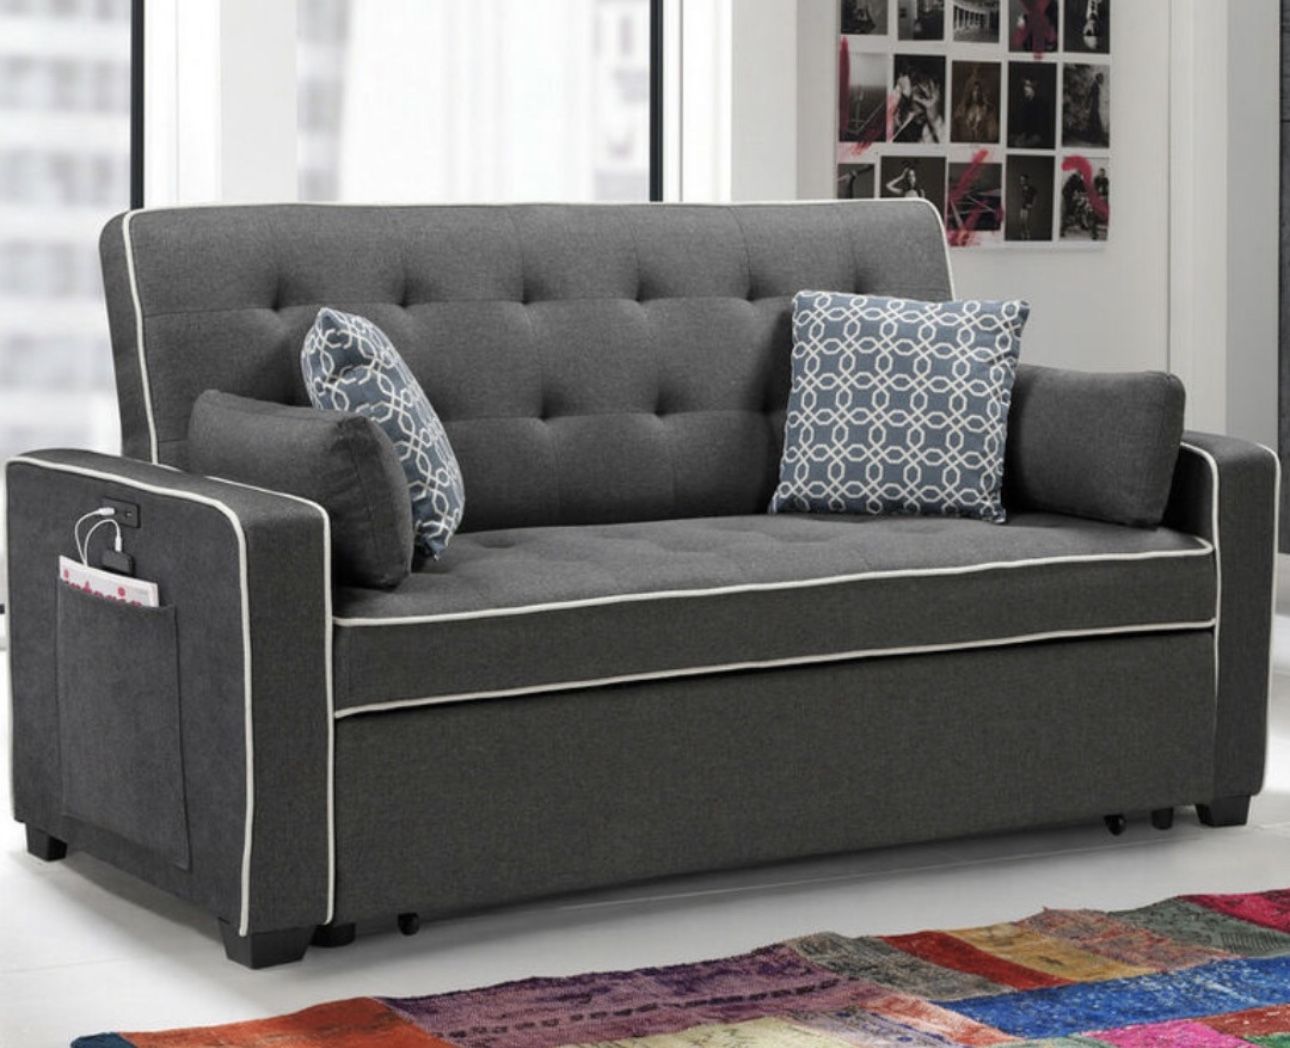 New Sleeper Sofa With Free Delivery 